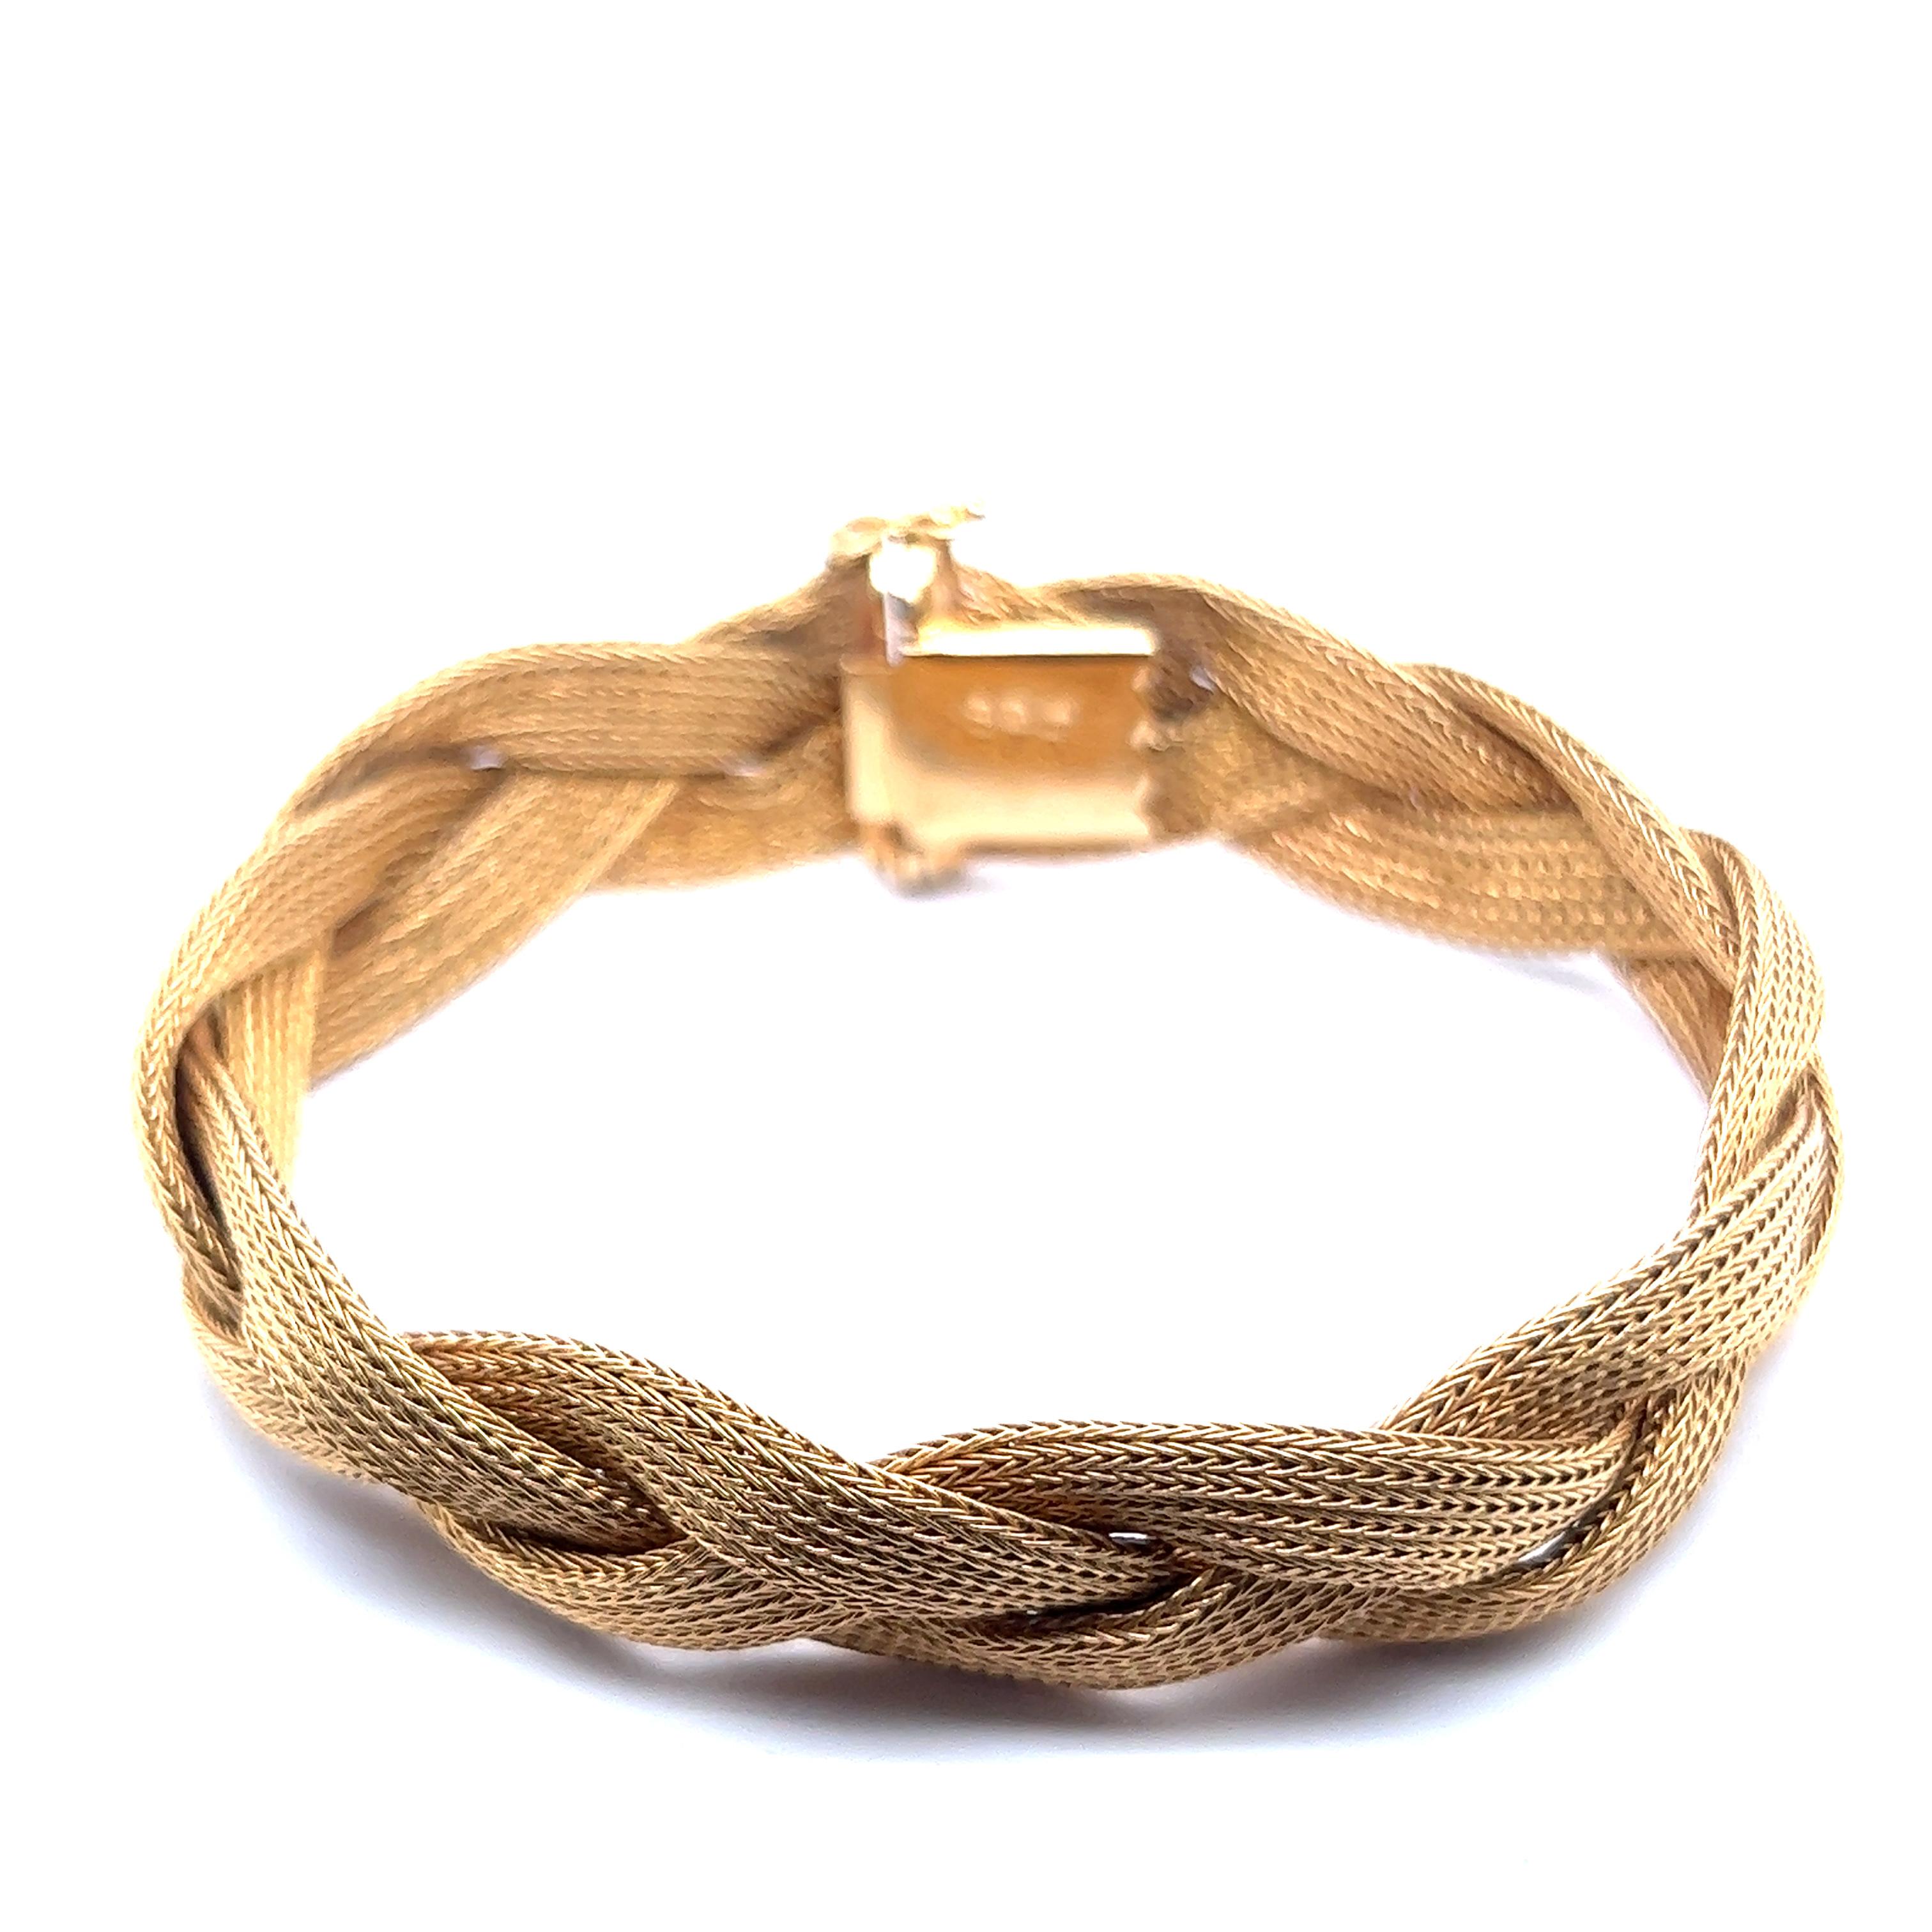 Introducing a classic piece - chic braided woven bracelet in 18 Karat red gold. Crafted with utmost care, this bracelet exudes charm and elegance. Delicately woven with three foxtail-style chains, it captures the essence of timeless style.

In a